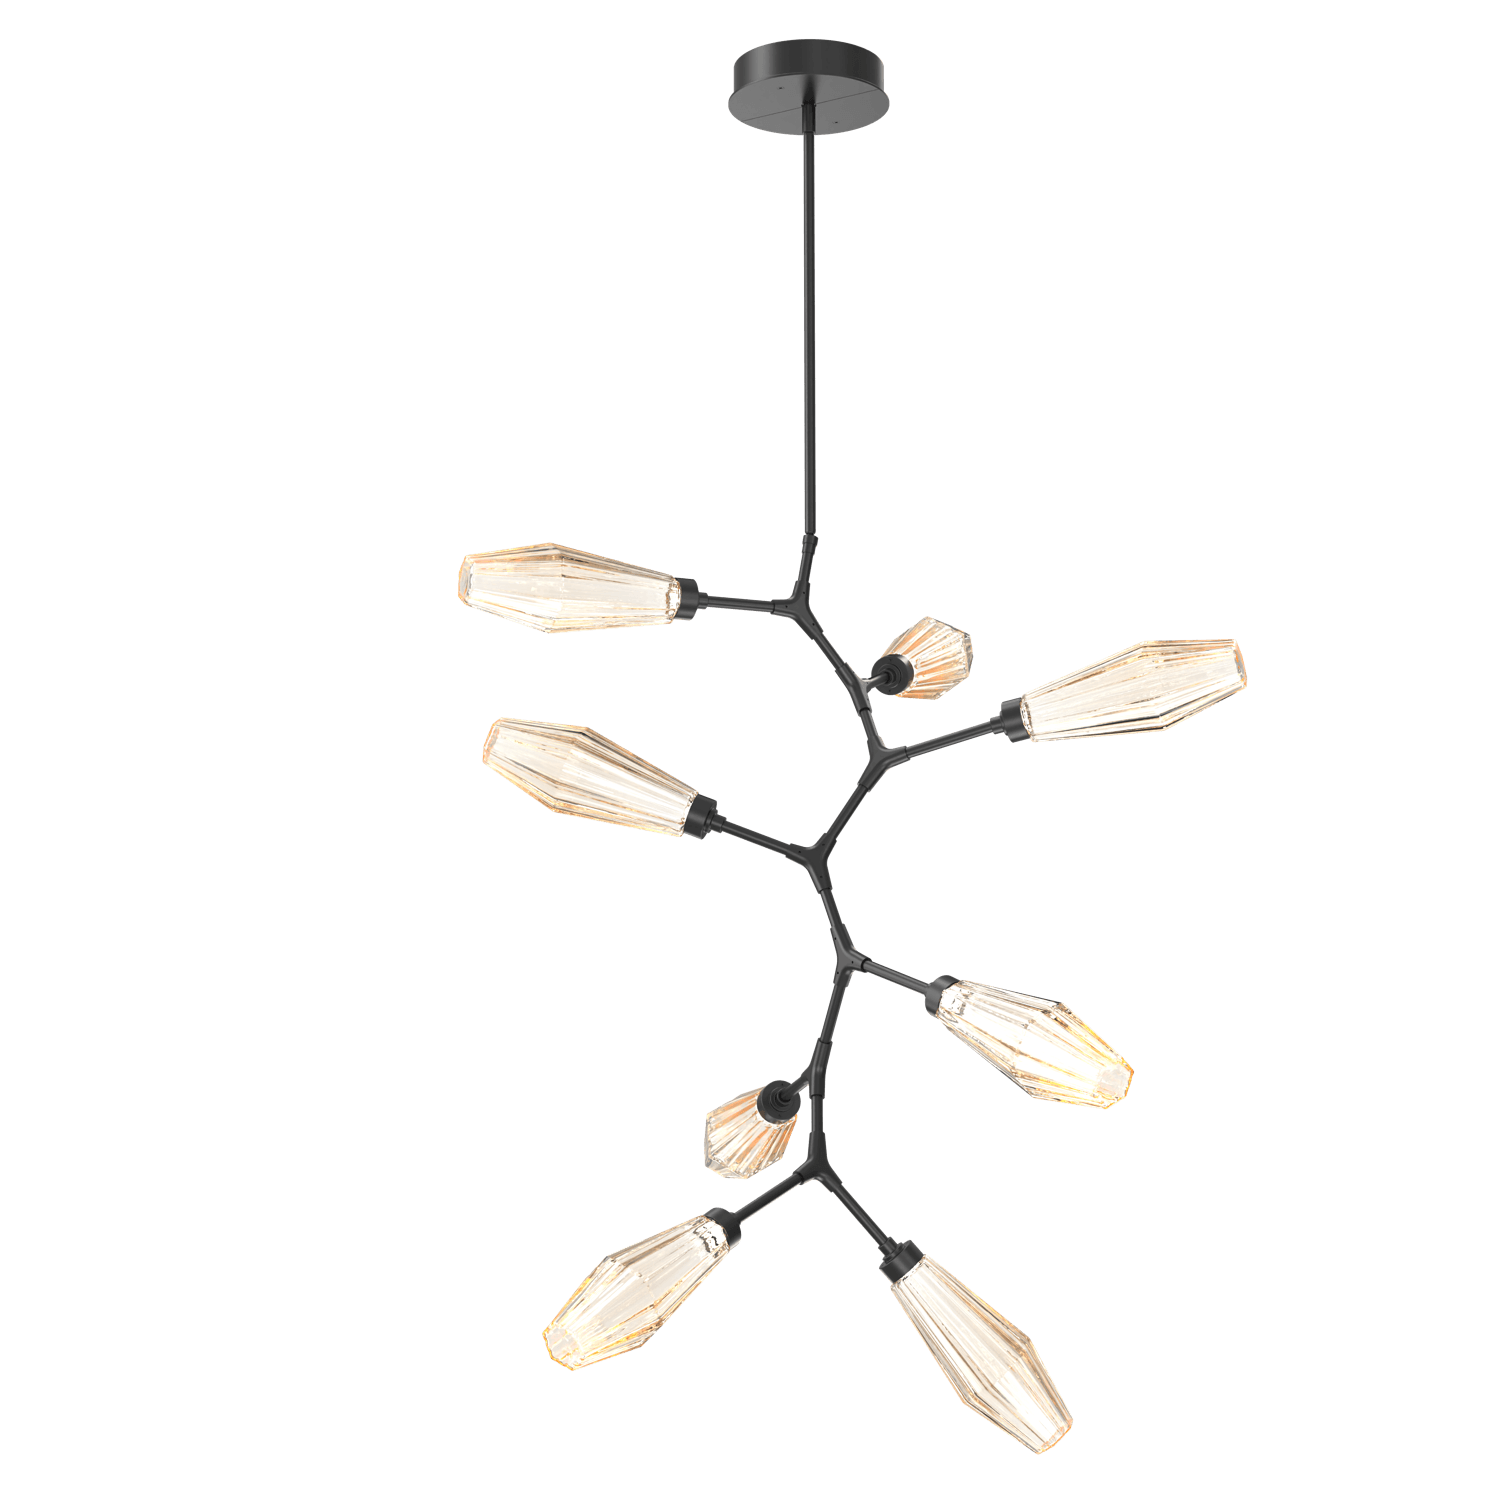 CHB0049-VB-MB-RA-Hammerton-Studio-Aalto-8-light-modern-vine-chandelier-with-matte-black-finish-and-optic-ribbed-amber-glass-shades-and-LED-lamping